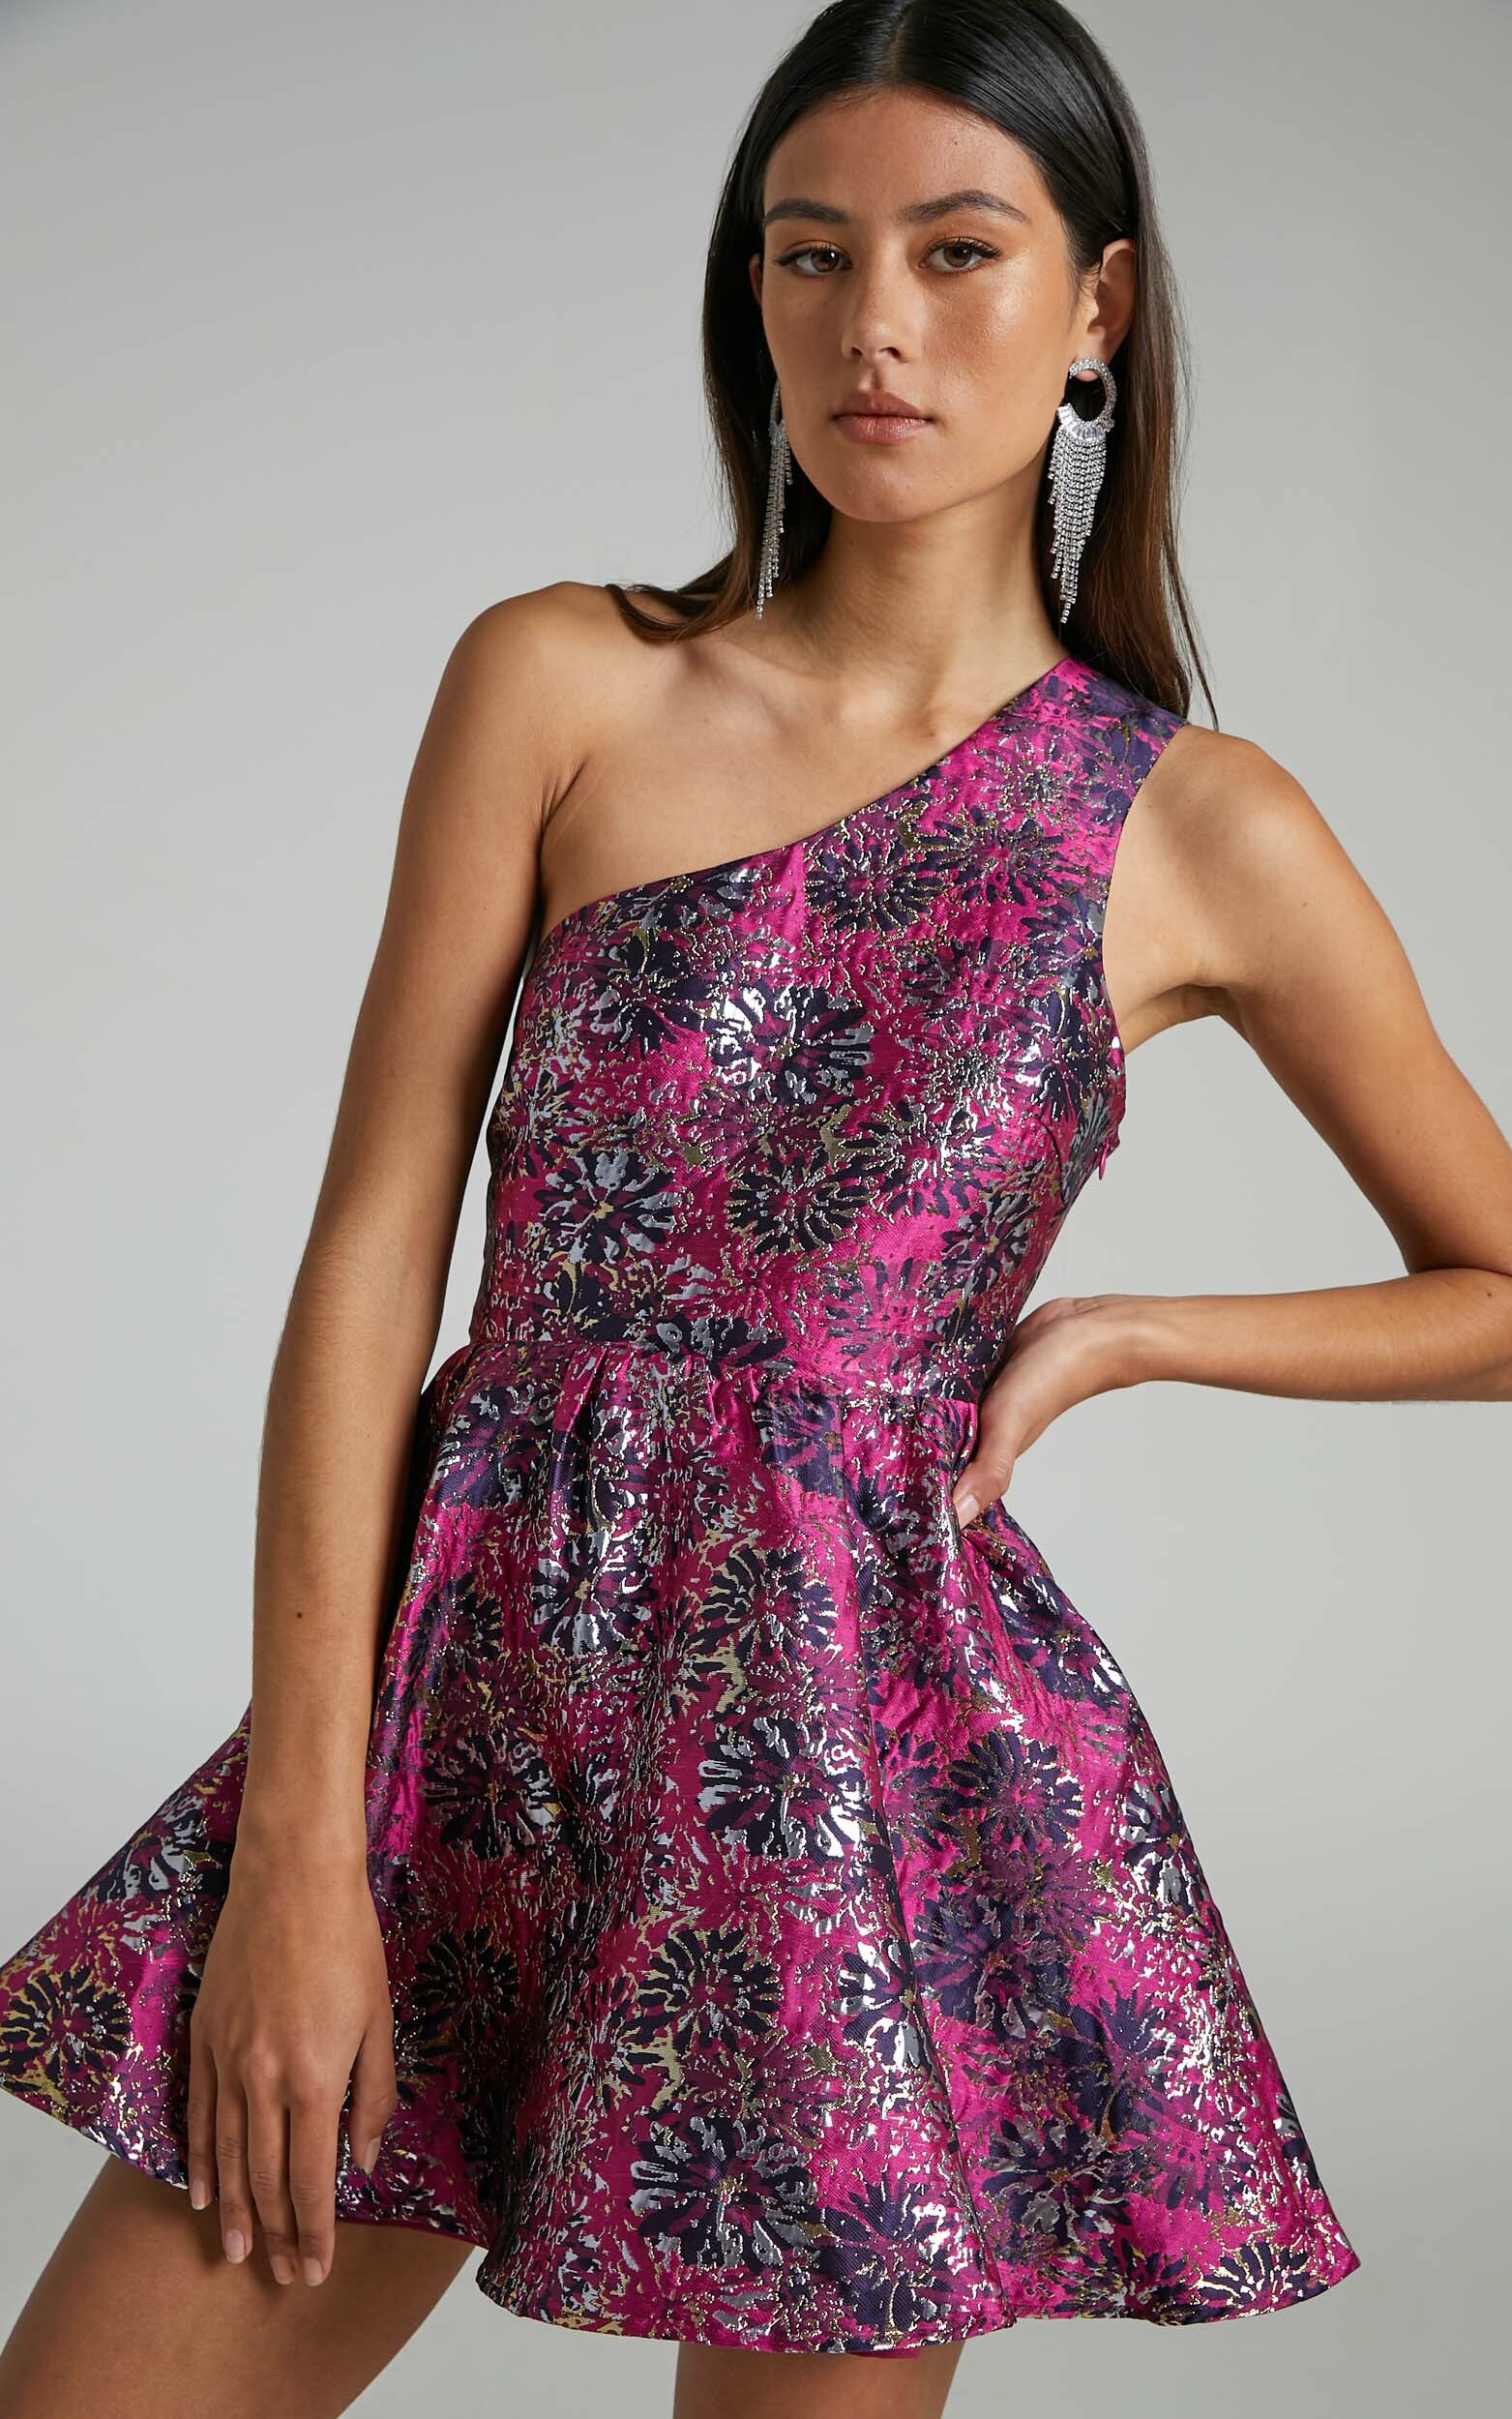 Brailey Rae One Shoulder Fit and Flare Mini Dress in Pink Floral - 04, PNK1, hi-res image number null